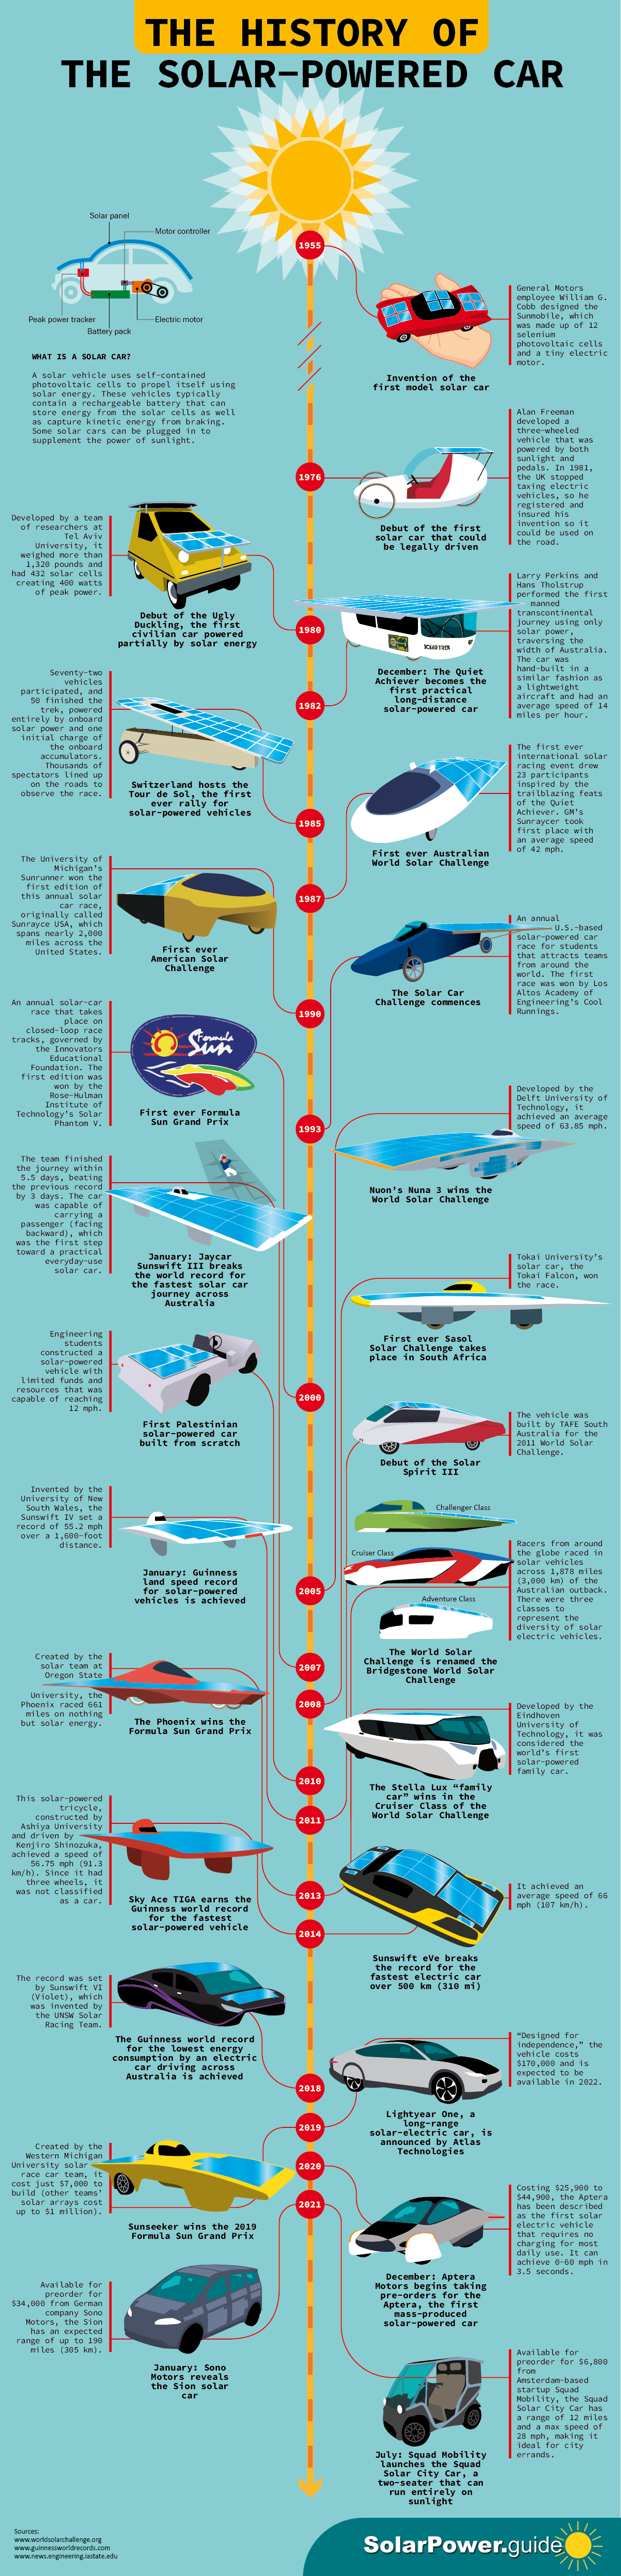 The History of the Solar-Powered Car - Solar Power Guide - Infographic